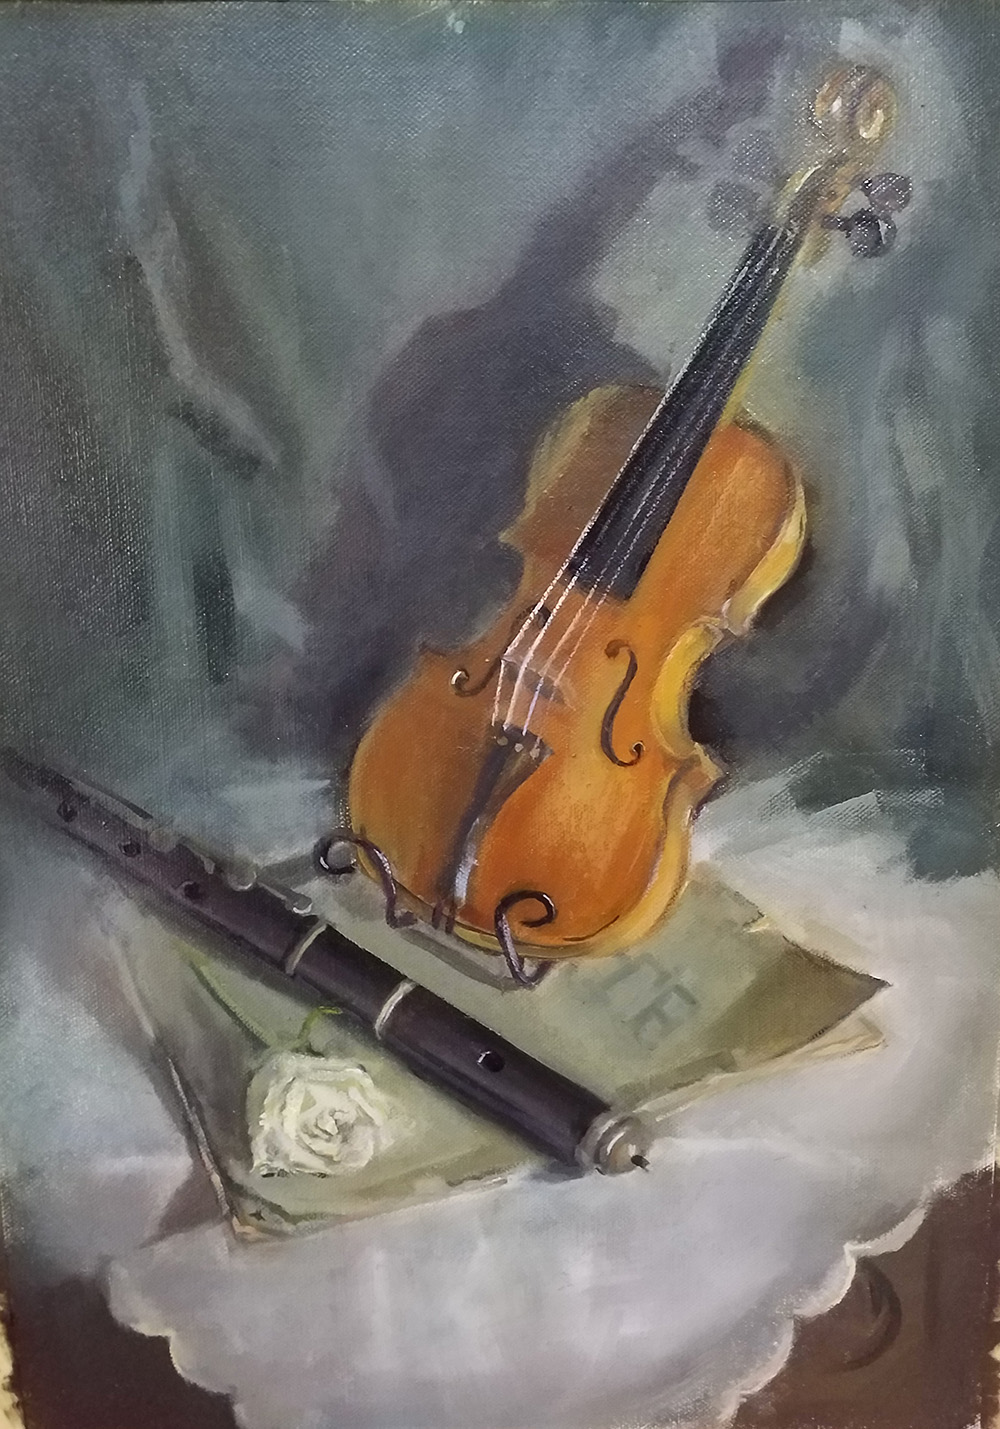 Painting of a violin